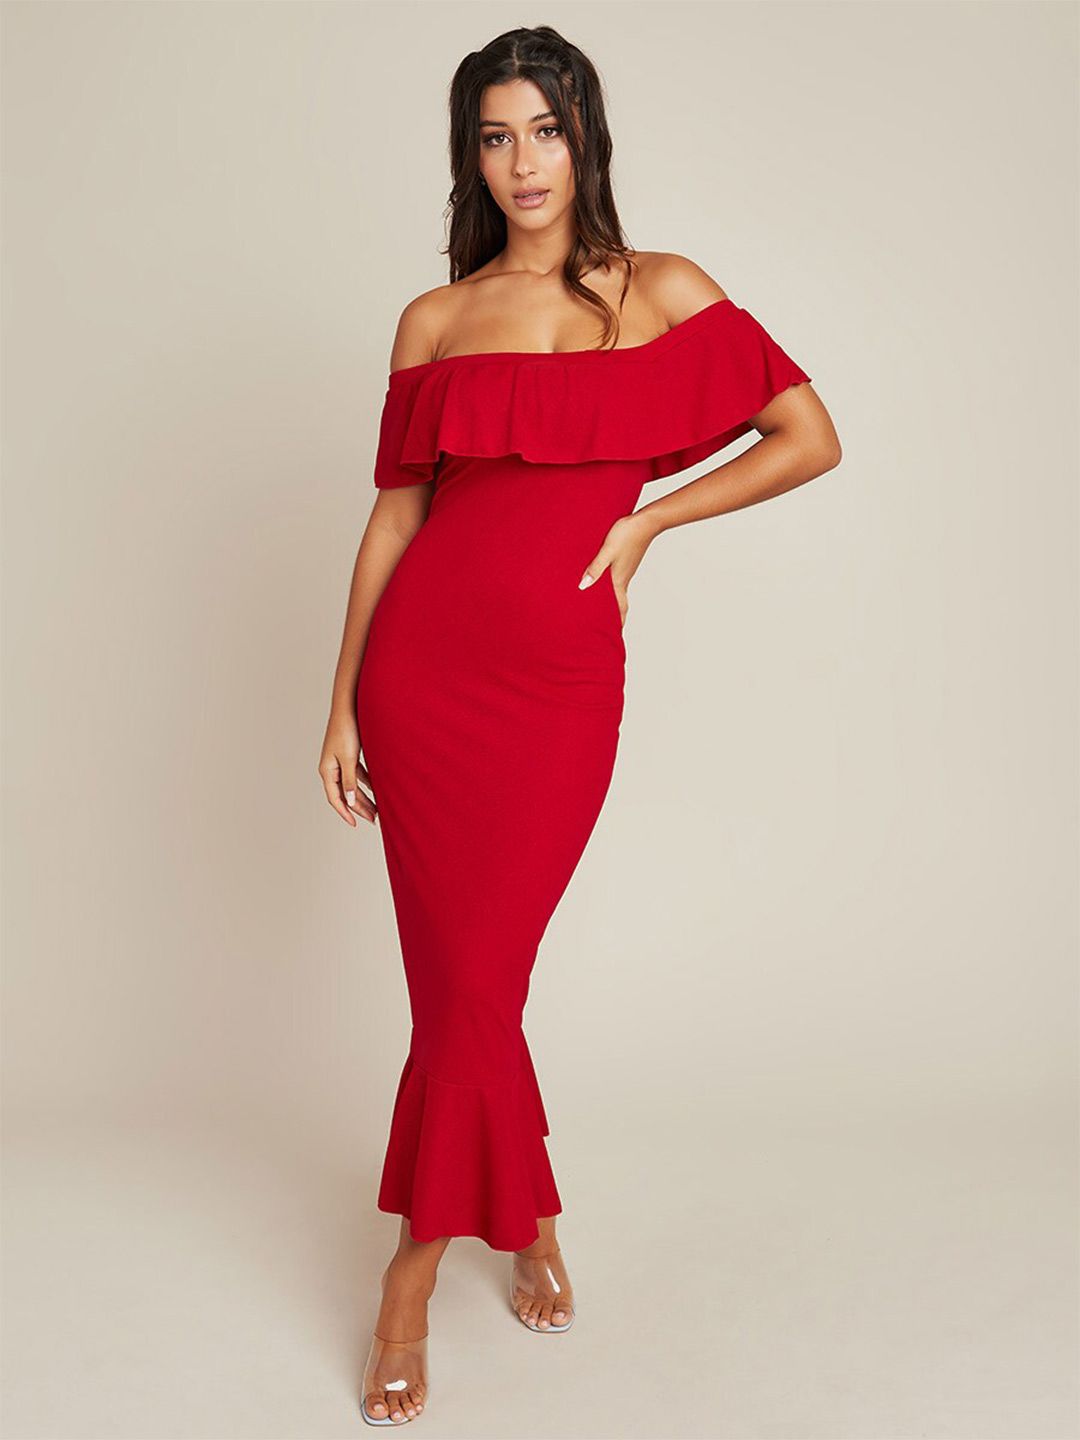 Styli Burgundy Off-Shoulder Maxi Dress Price in India